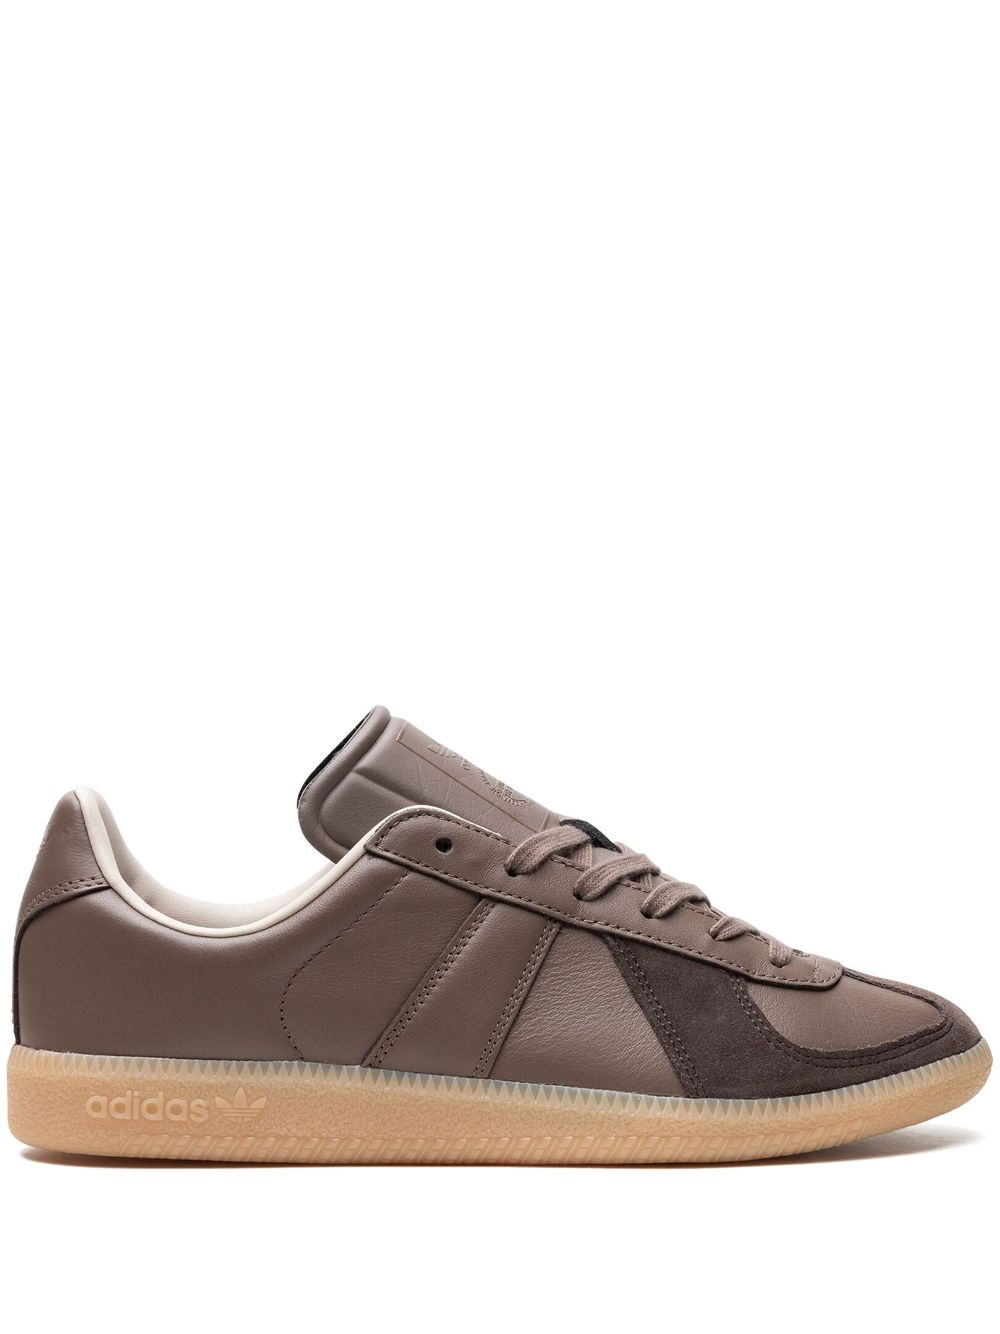 adidas x Size? BW Army "Brown/Gum" sneakers - Marrone